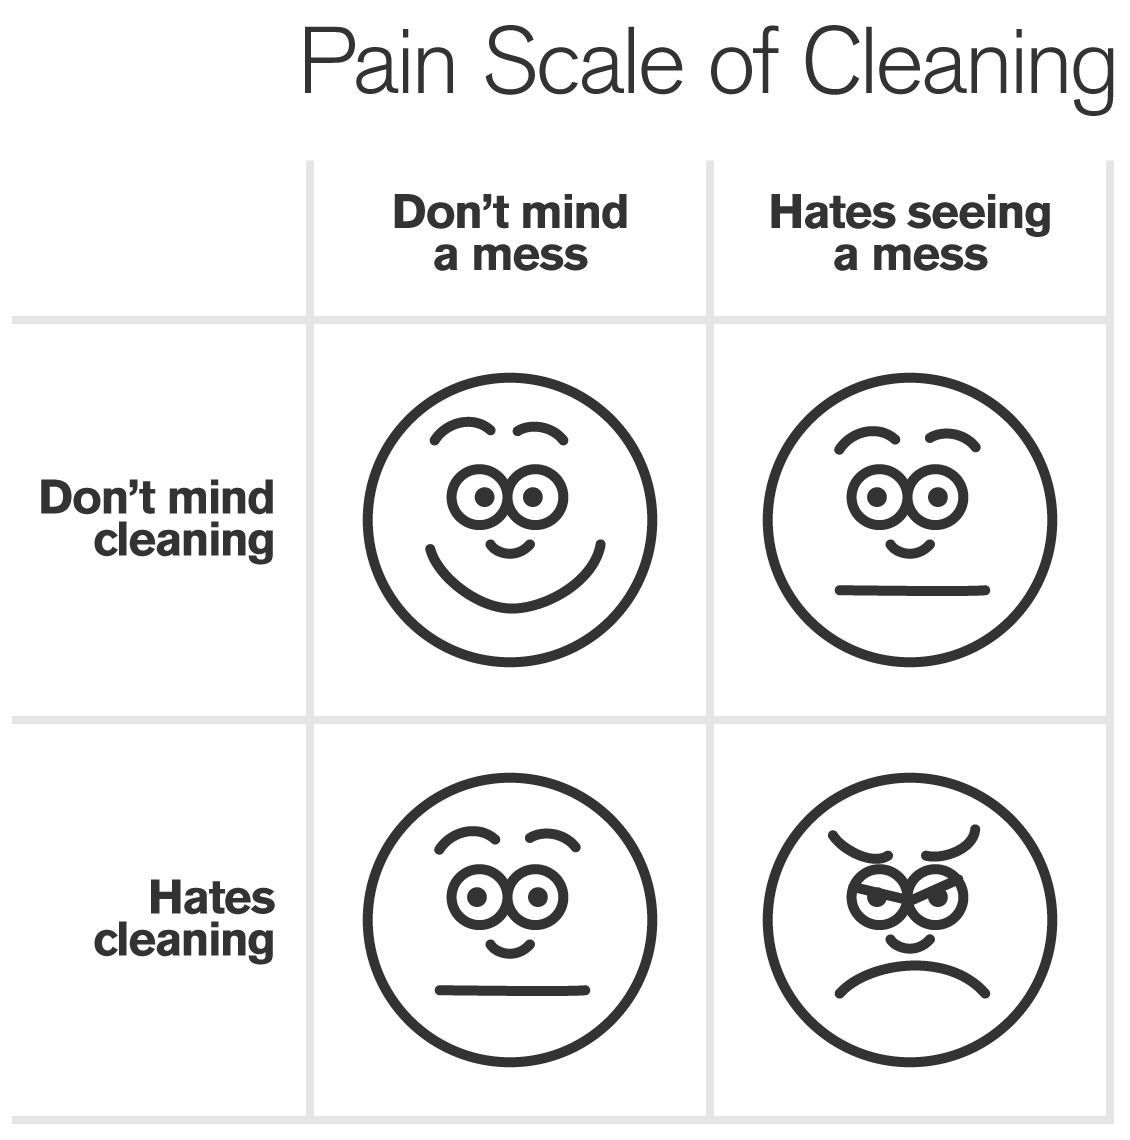 Pain Scale of Cleaning